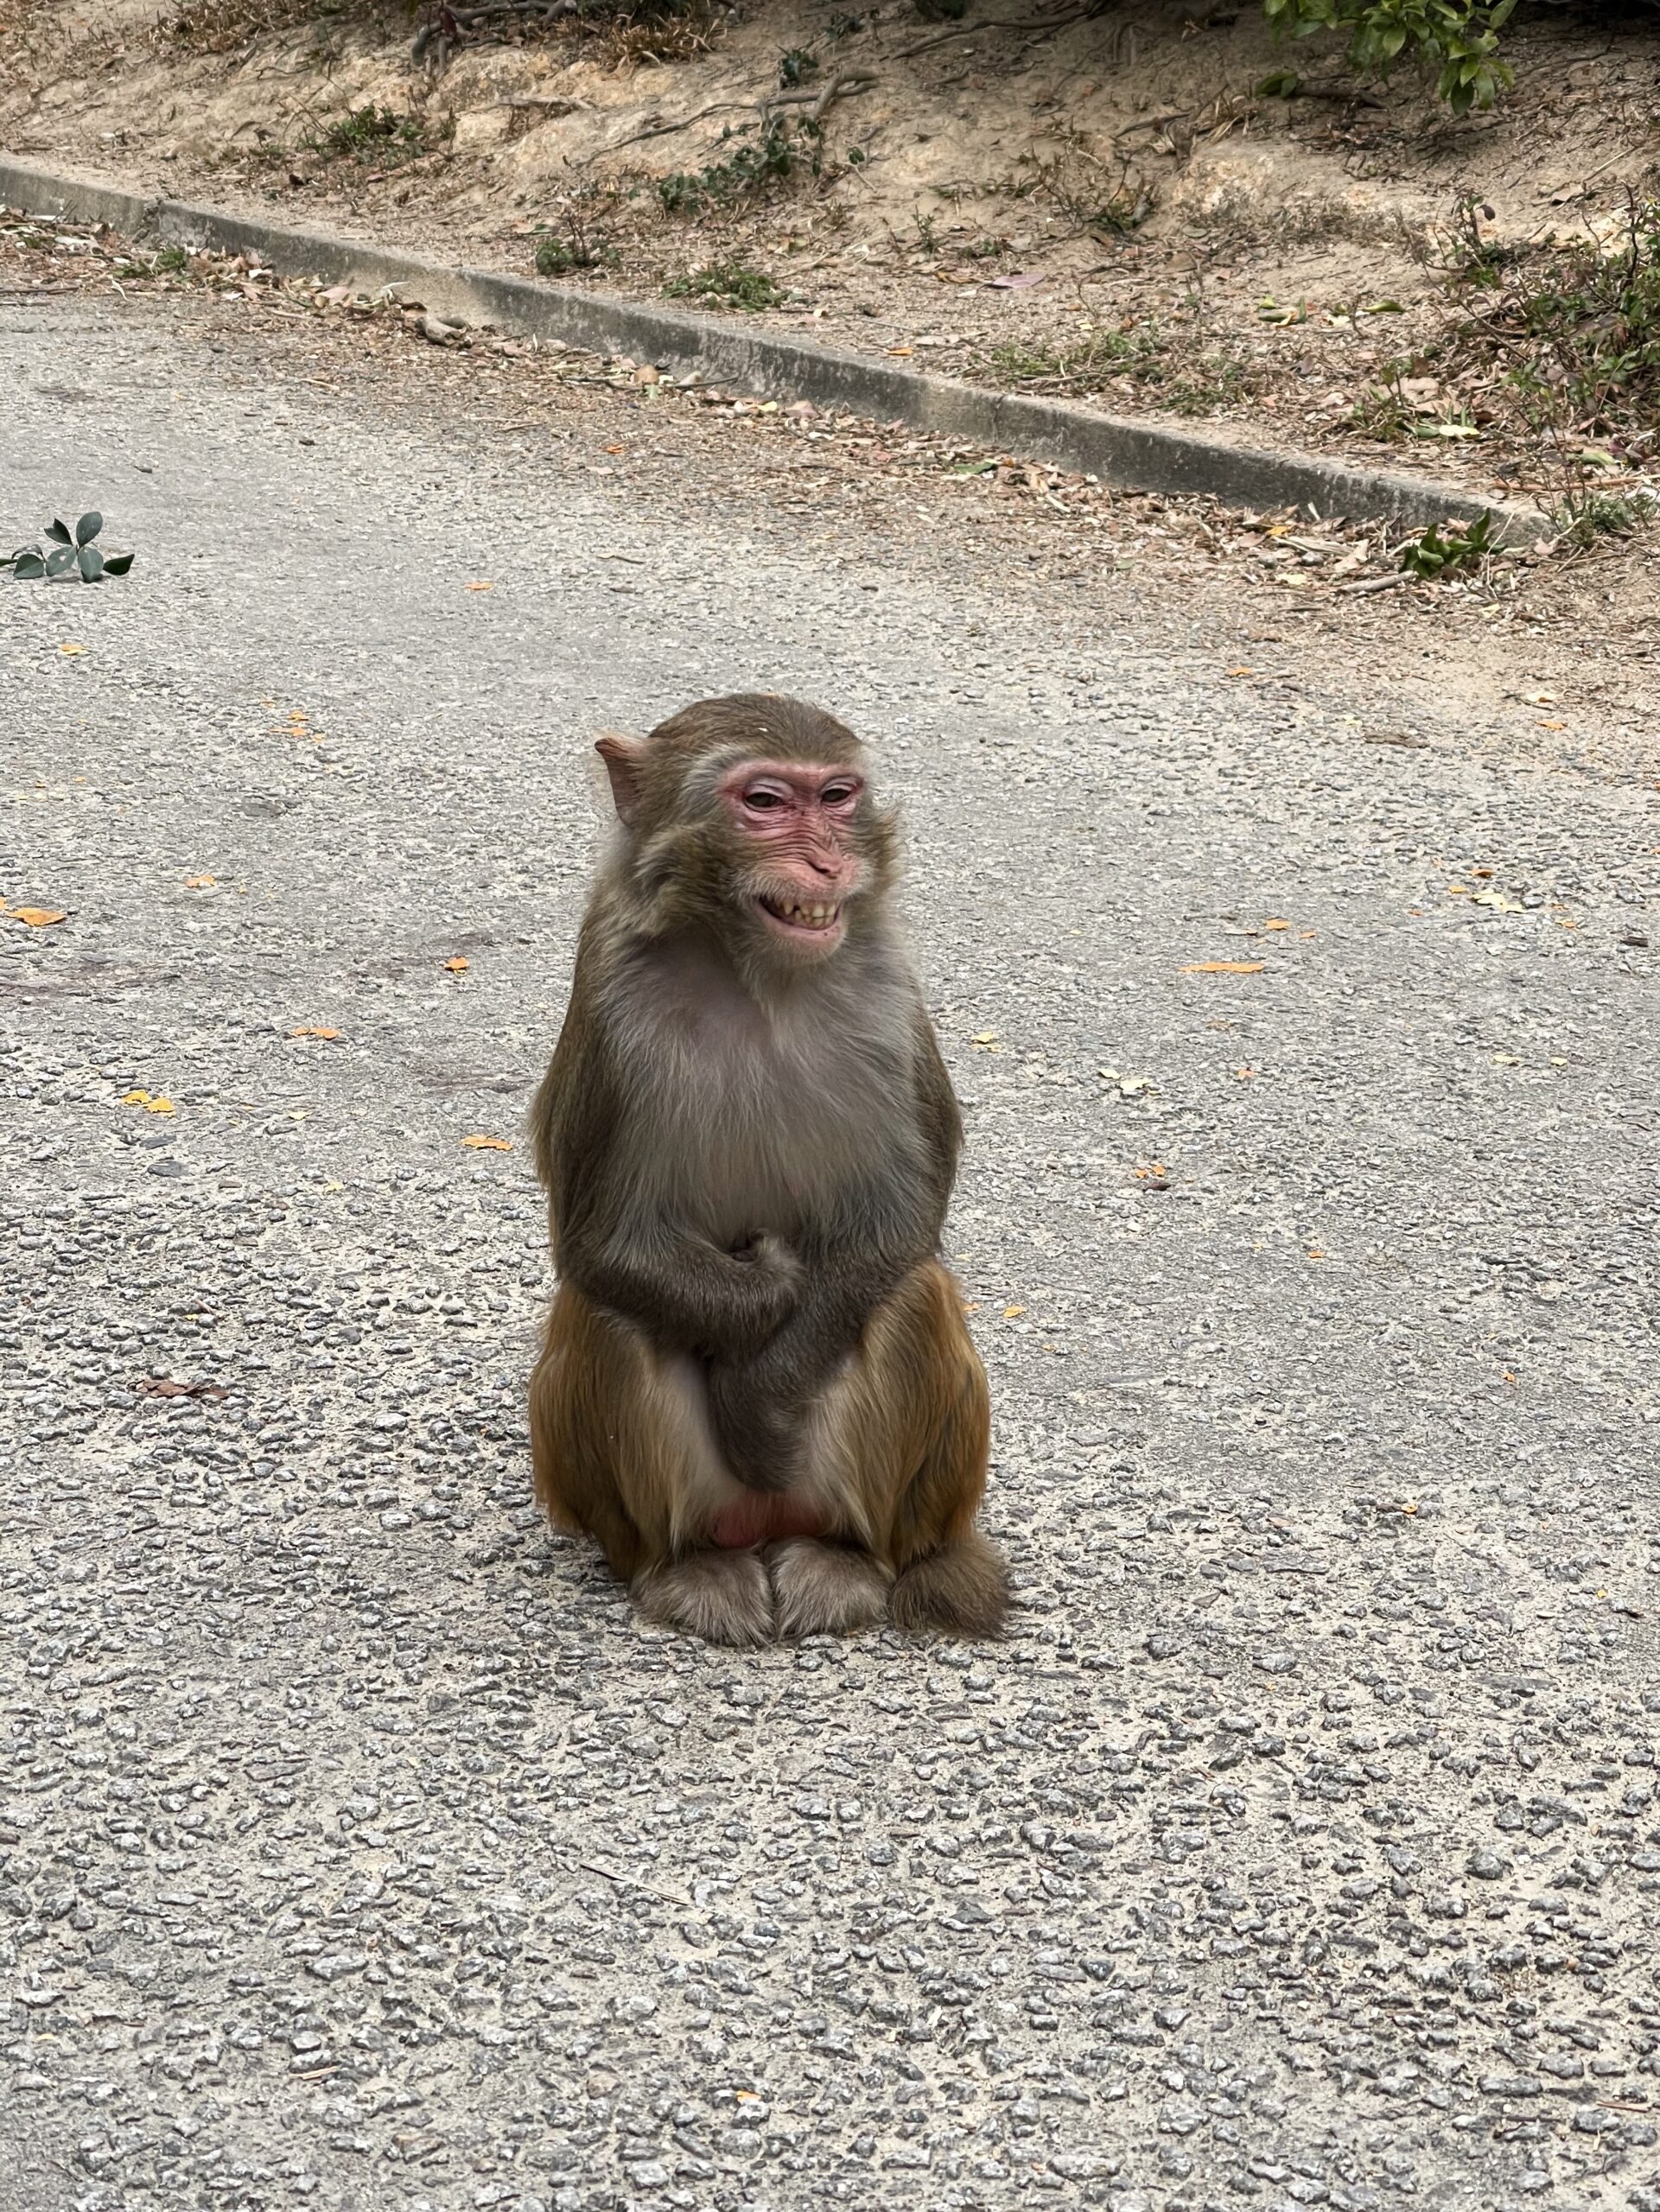 Is this monkey smiling, or just angry? I think it's the second.